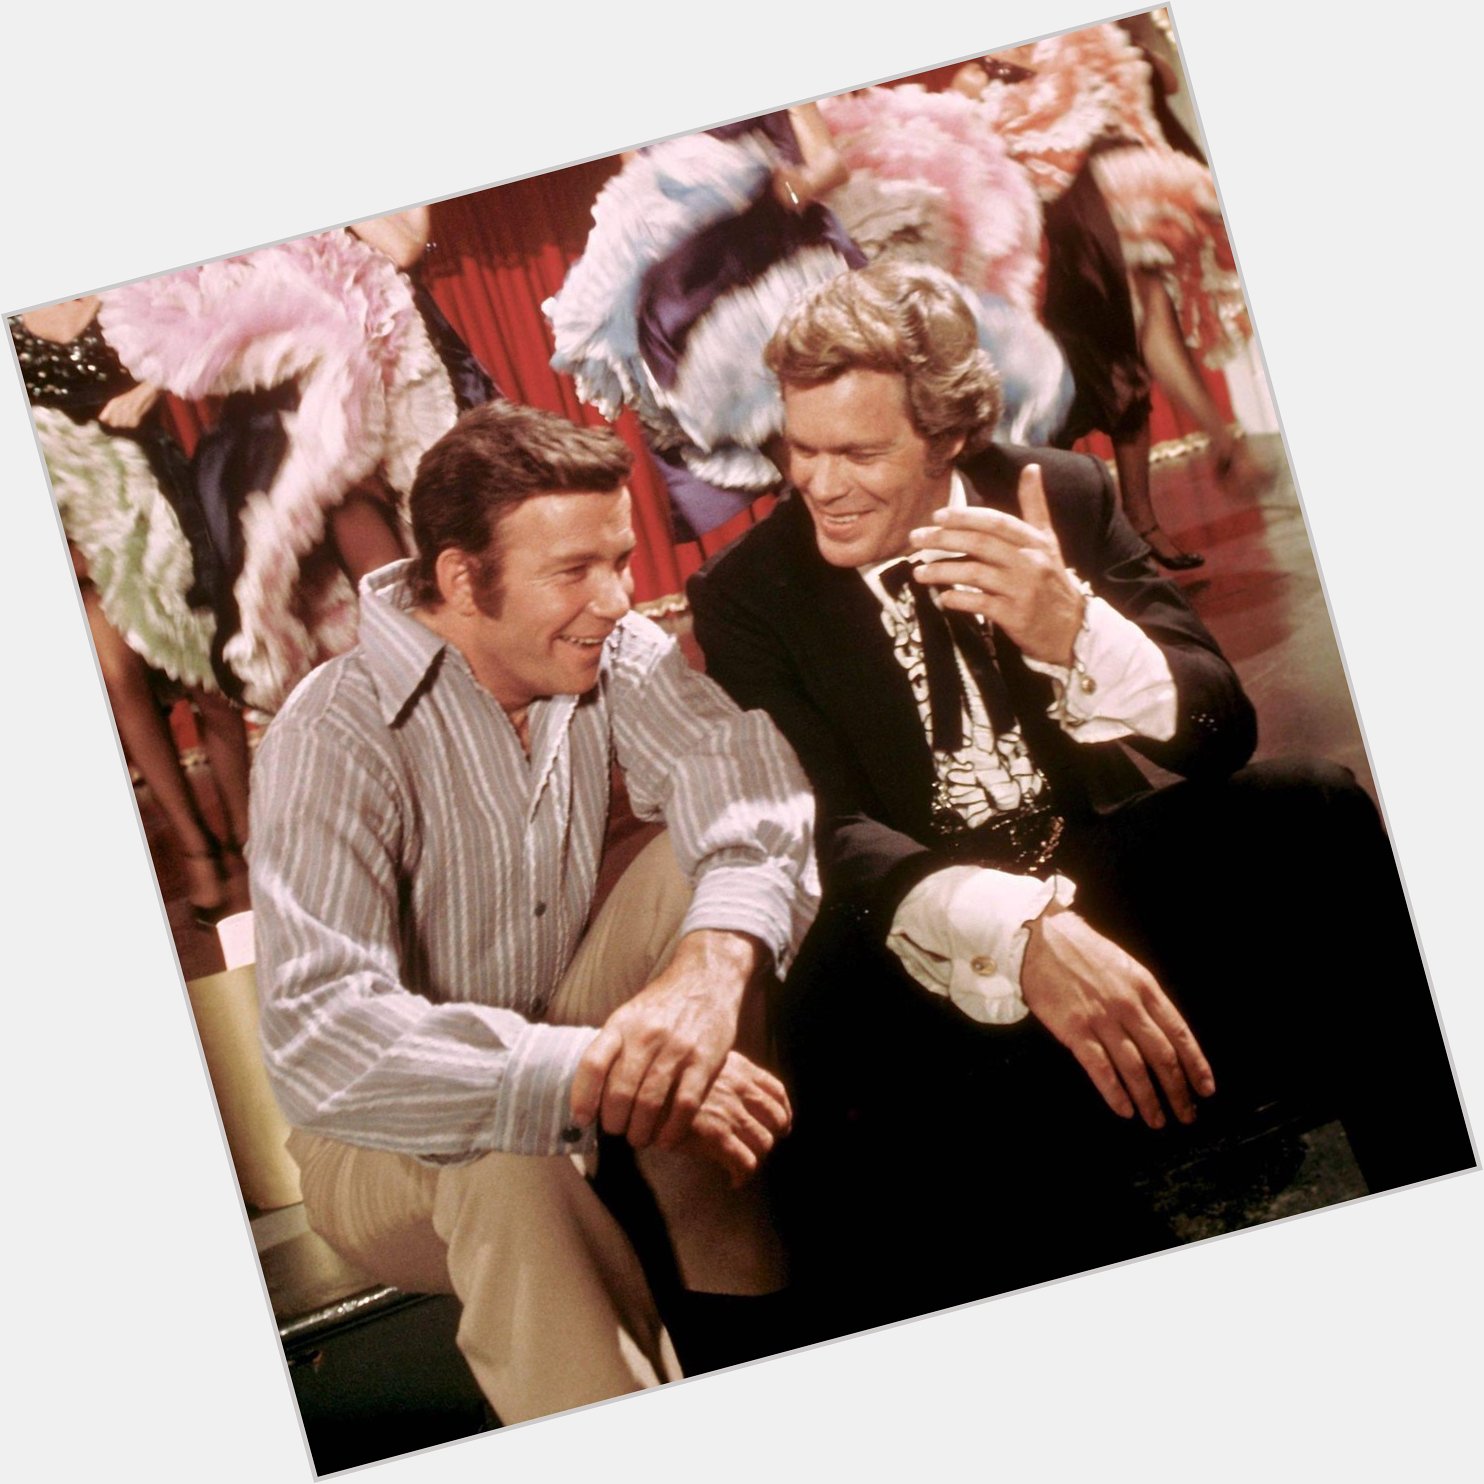 Happy Birthday Doug McClure, born this day in 1935.
Pictured here with 